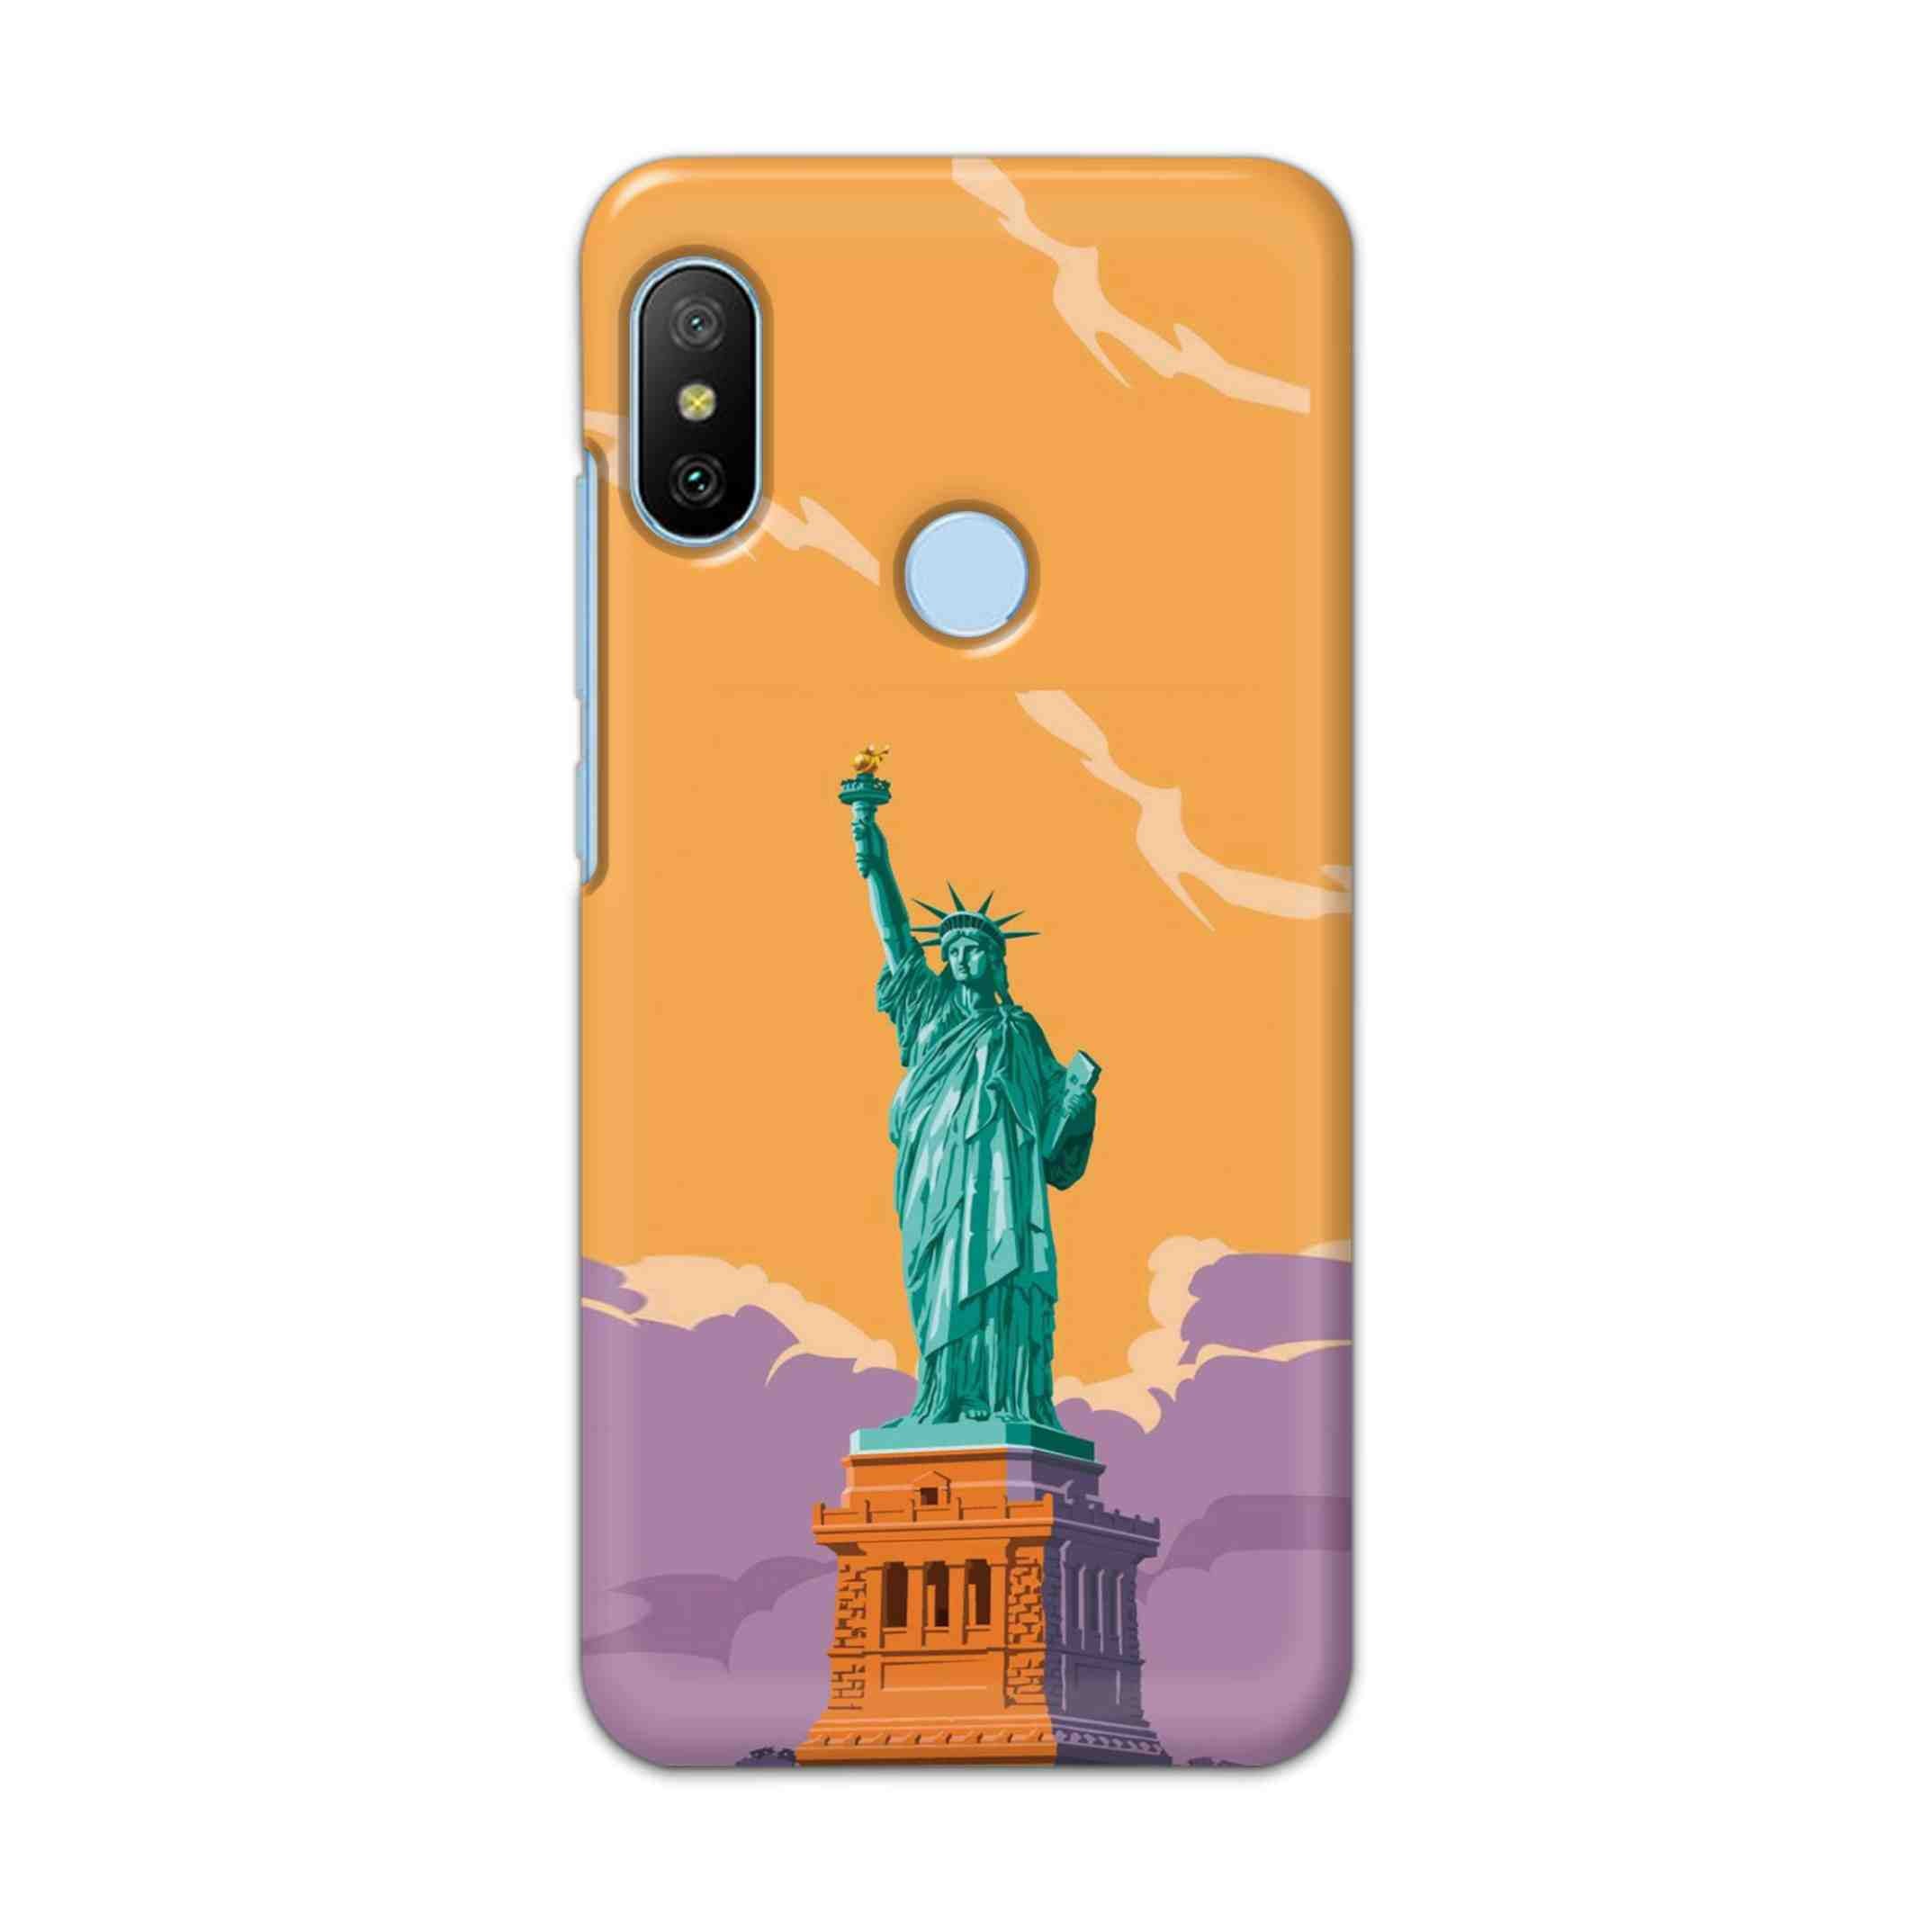 Buy Statue Of Liberty Hard Back Mobile Phone Case/Cover For Xiaomi Redmi 6 Pro Online